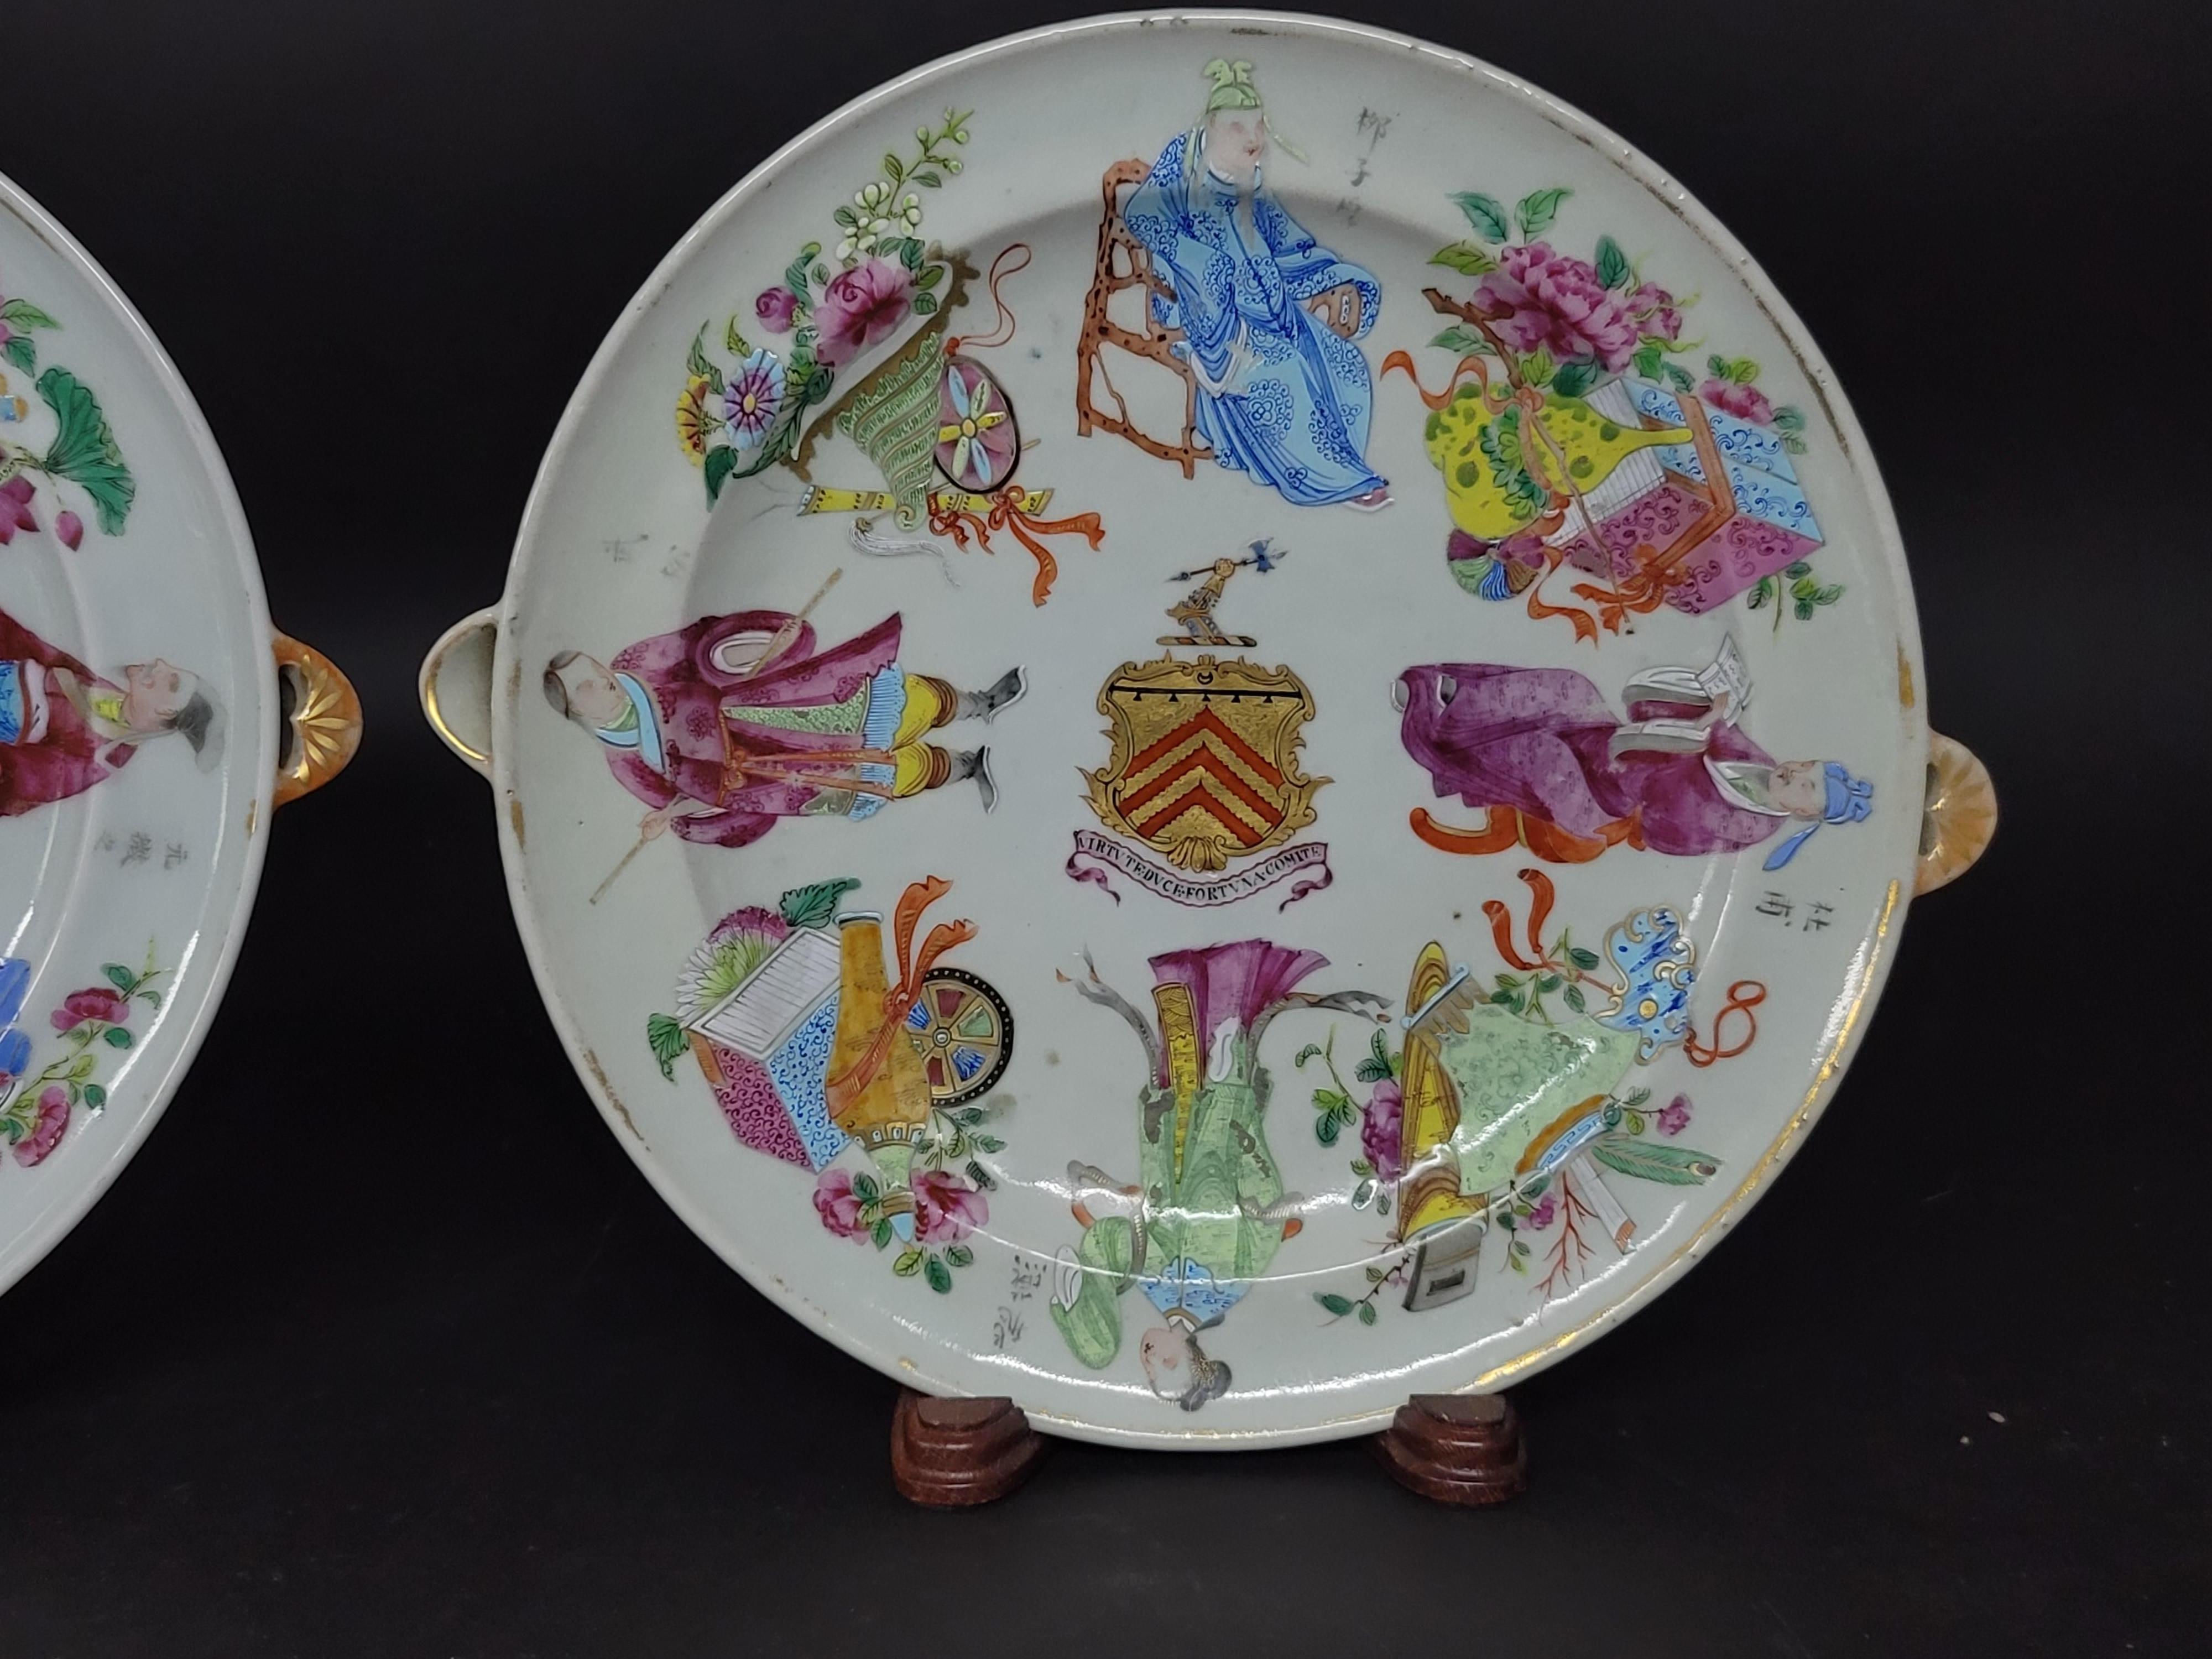 Early 19th century. Warming plates with water reservoir and historical figures and family crest in the center of the plate. The Arms of 